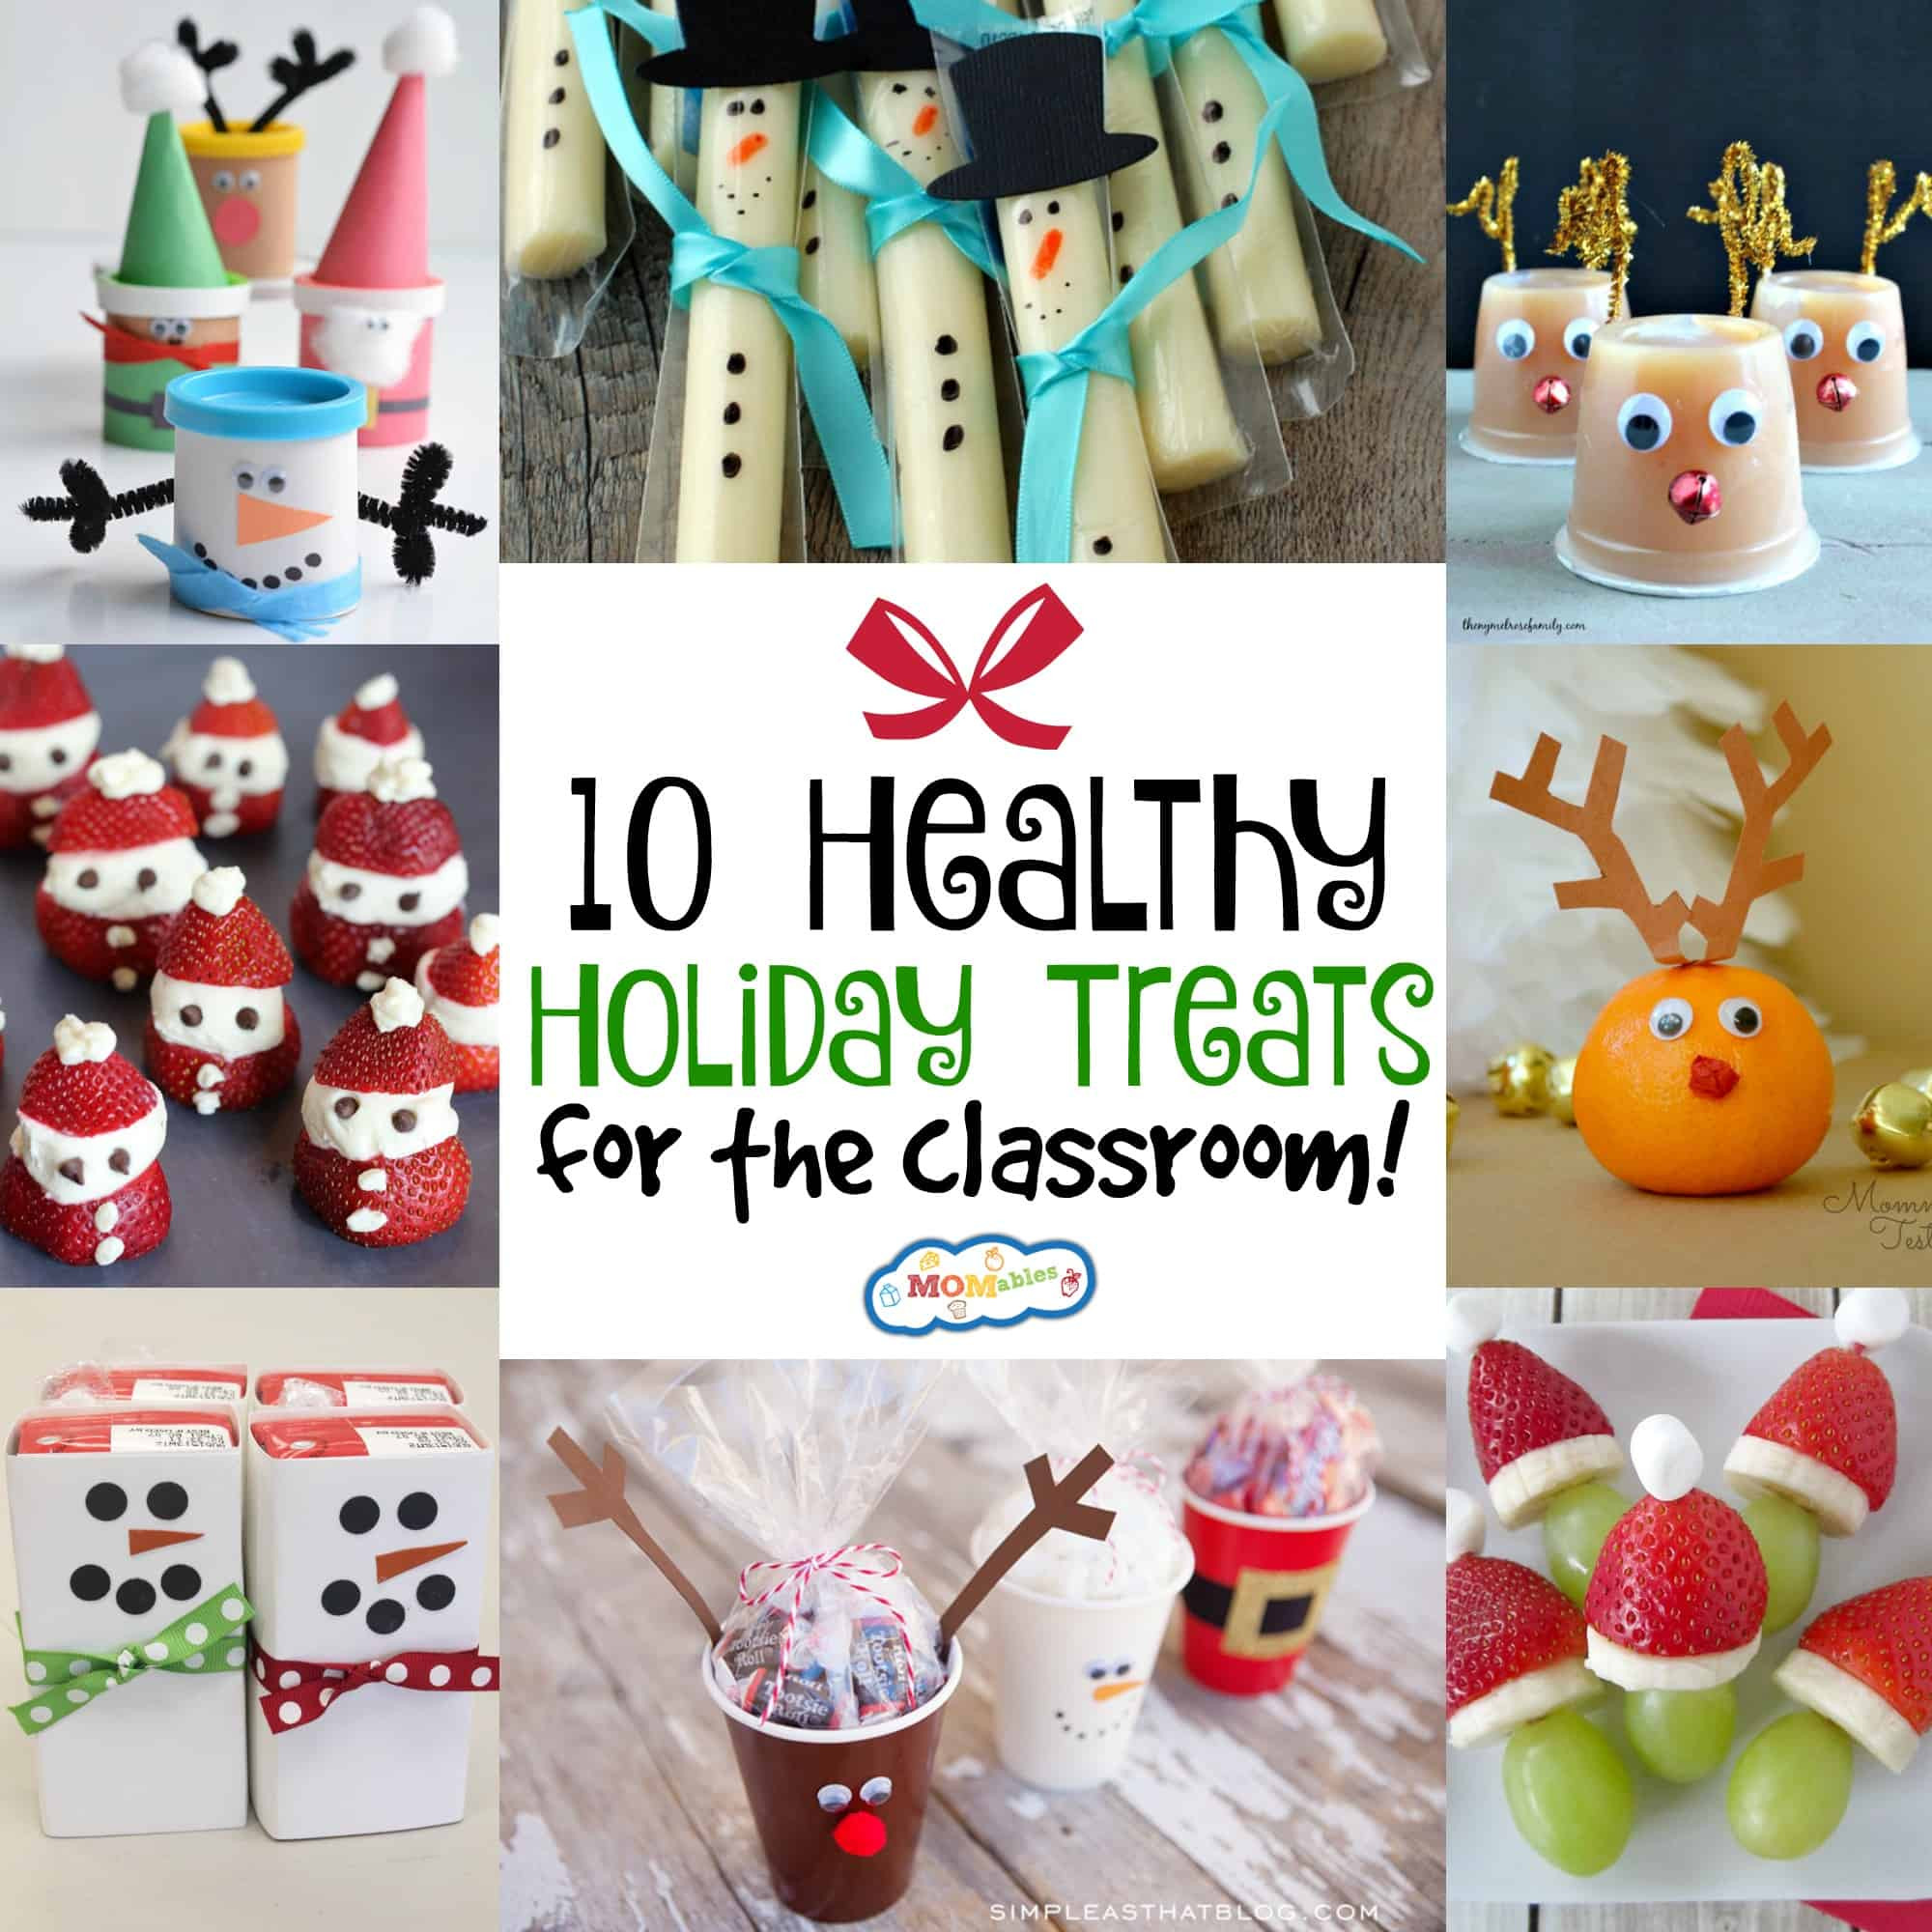 Holiday Class Party Food Ideas
 10 Healthy Holiday Treats for the Classroom MOMables